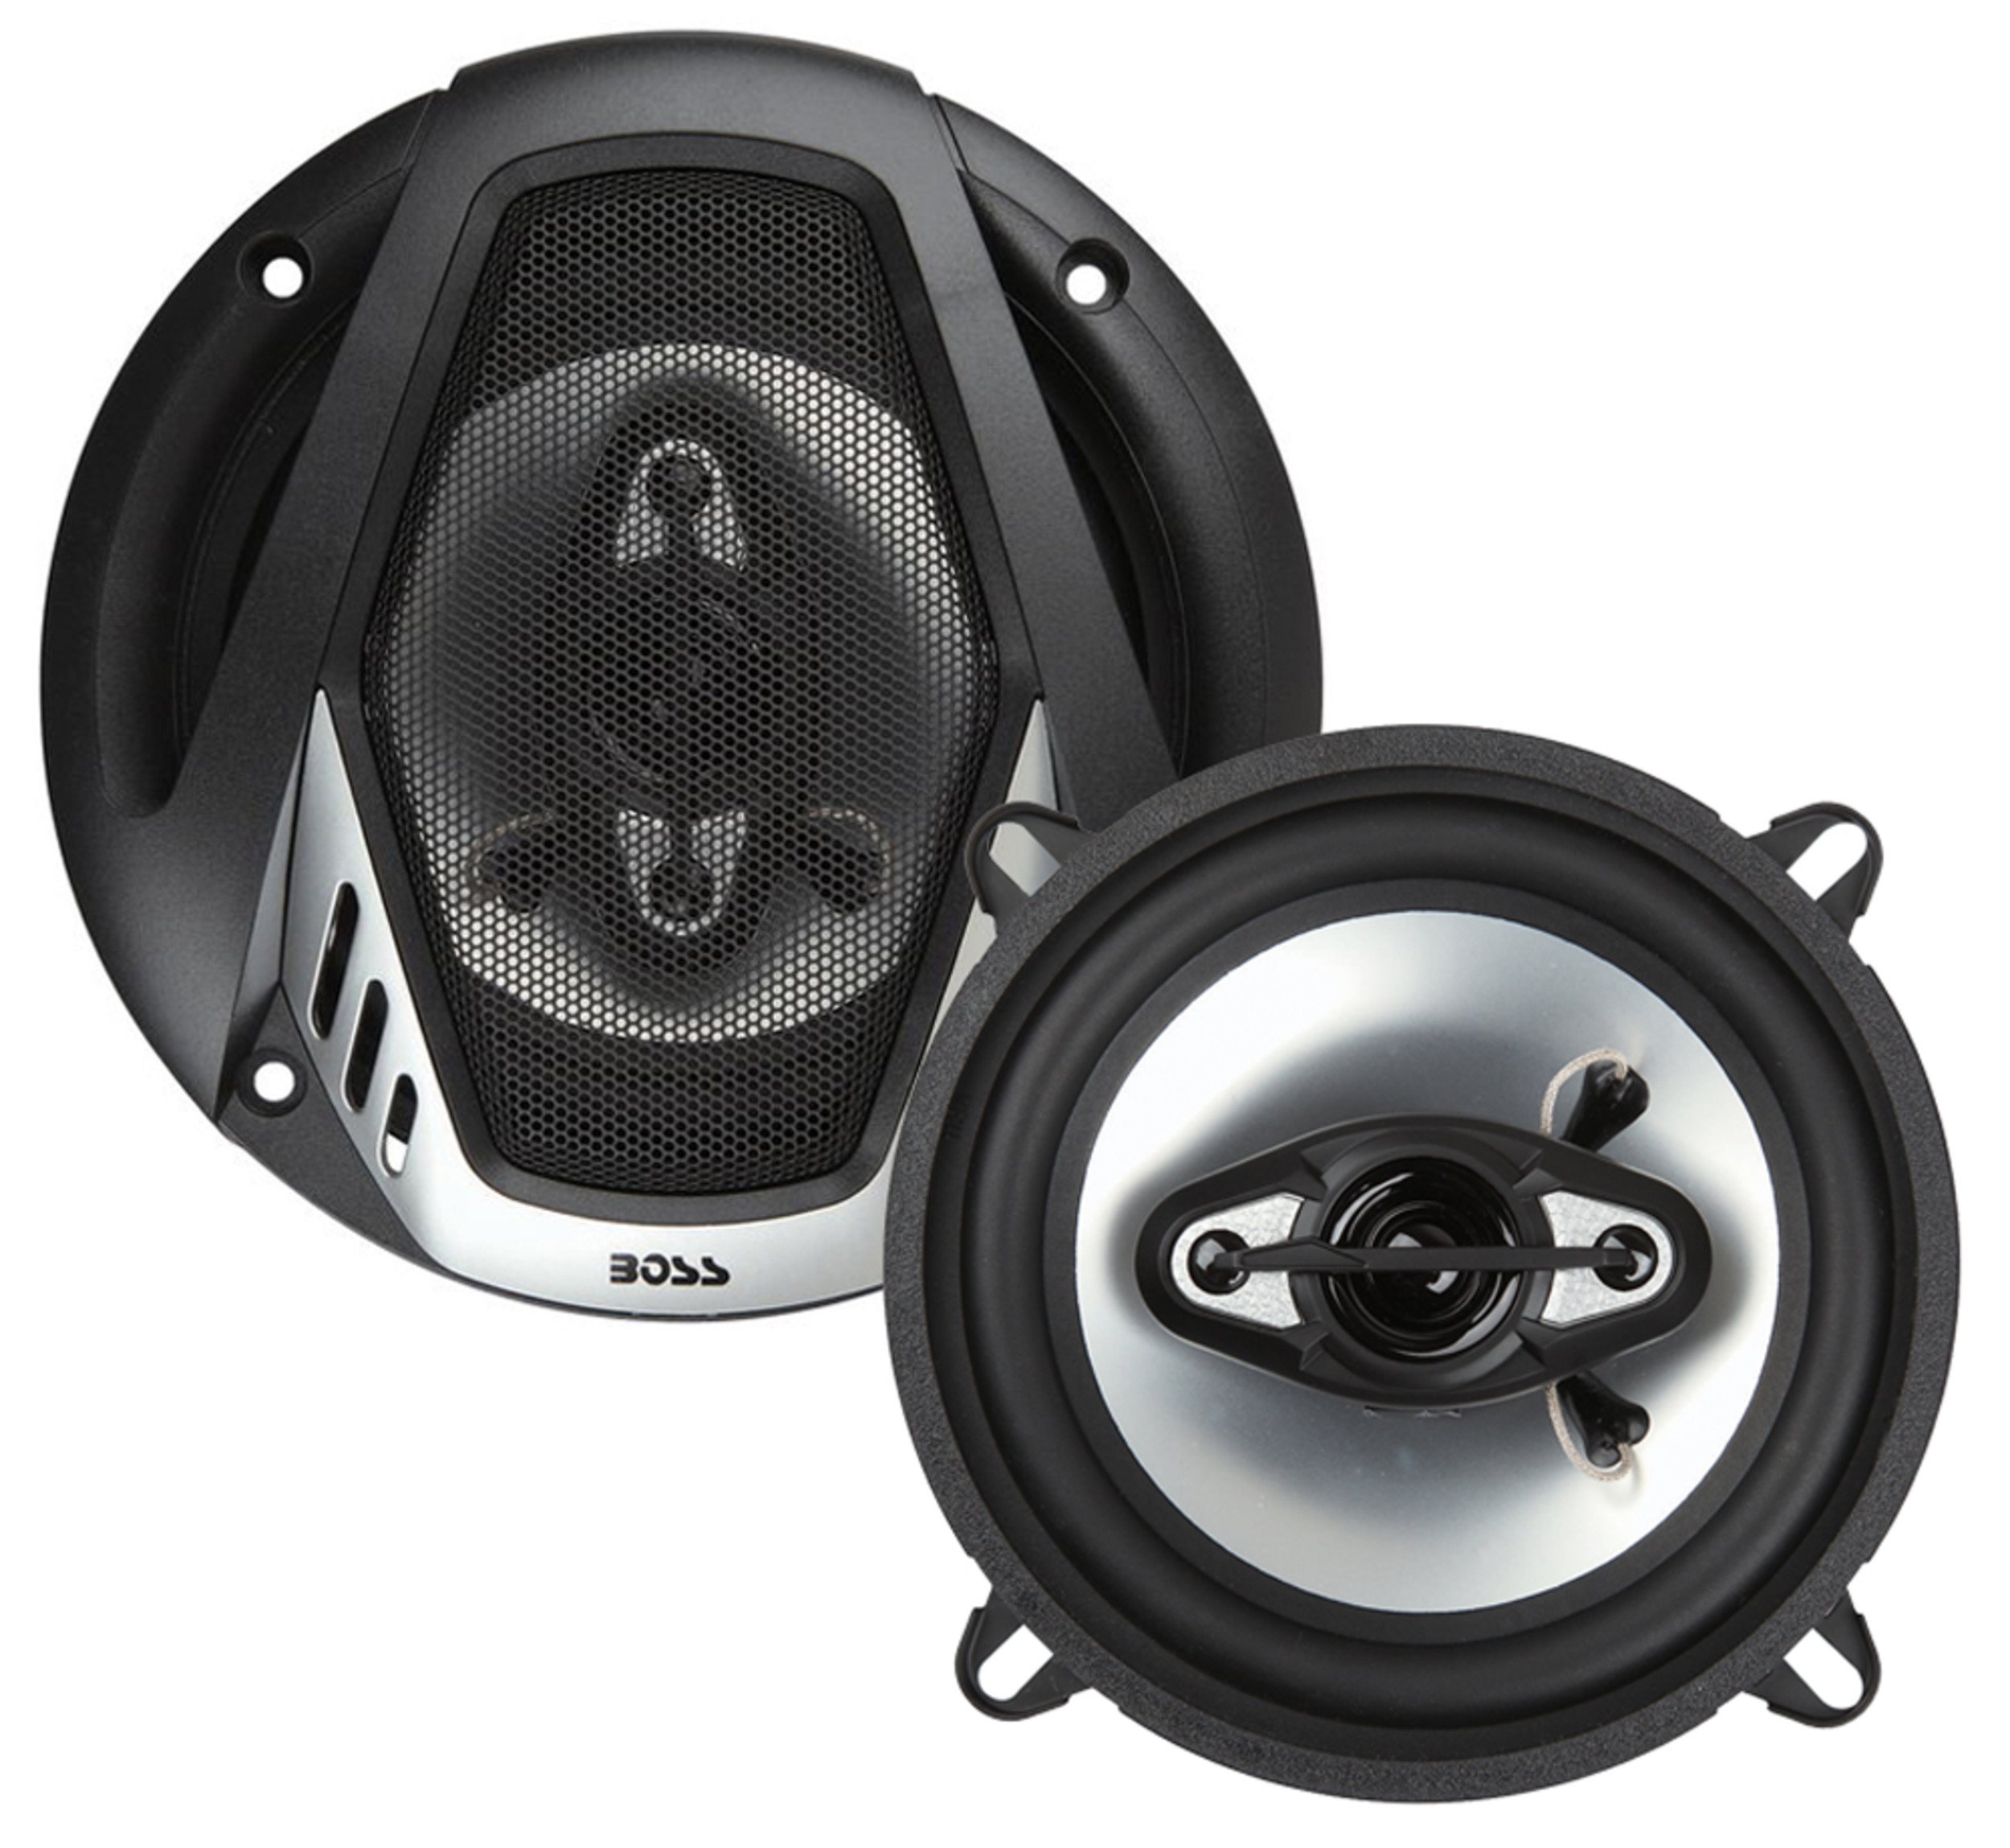 BOSS NX524 5.25" 300W & 6.5" 400W 4 Way Car Audio Coaxial Speakers (4 Pack) - image 3 of 10